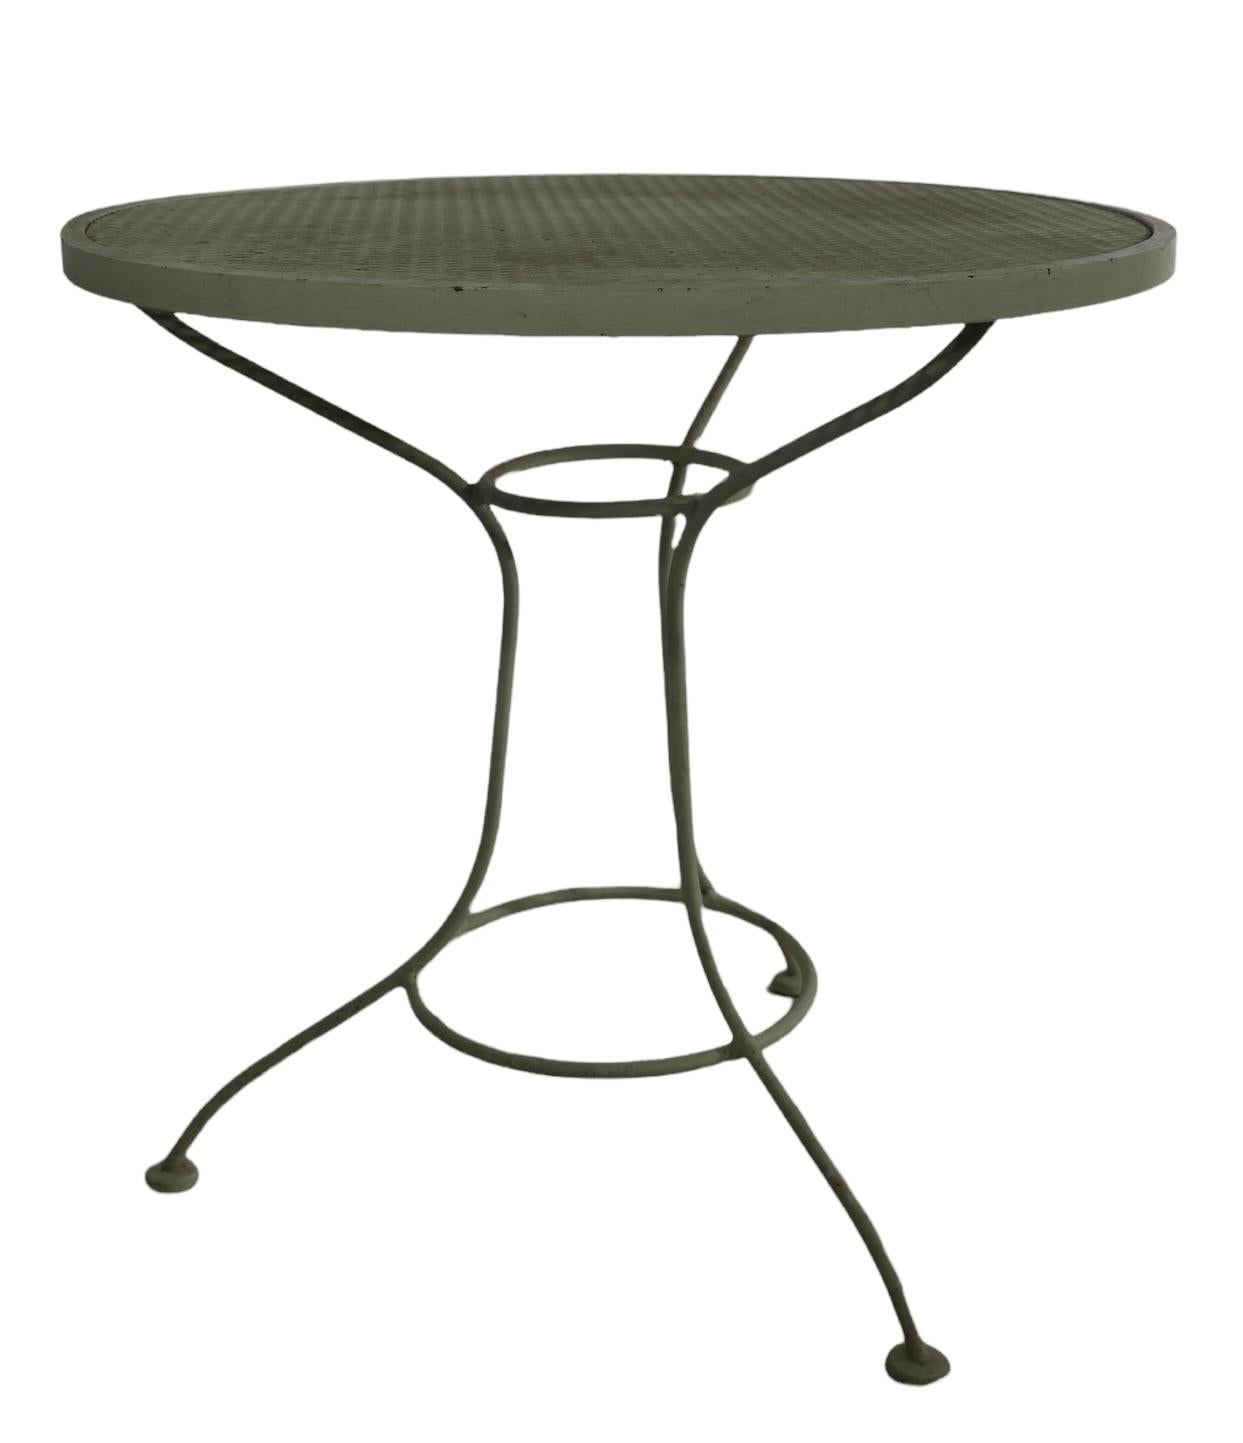 Chic and stylish diminutive cafe, dining table by Salterini. Perfect garden, patio, poolside table, having a wrought iron base, and metal mesh top surface. This example is in very good, original, clean and ready to use condition. 
 